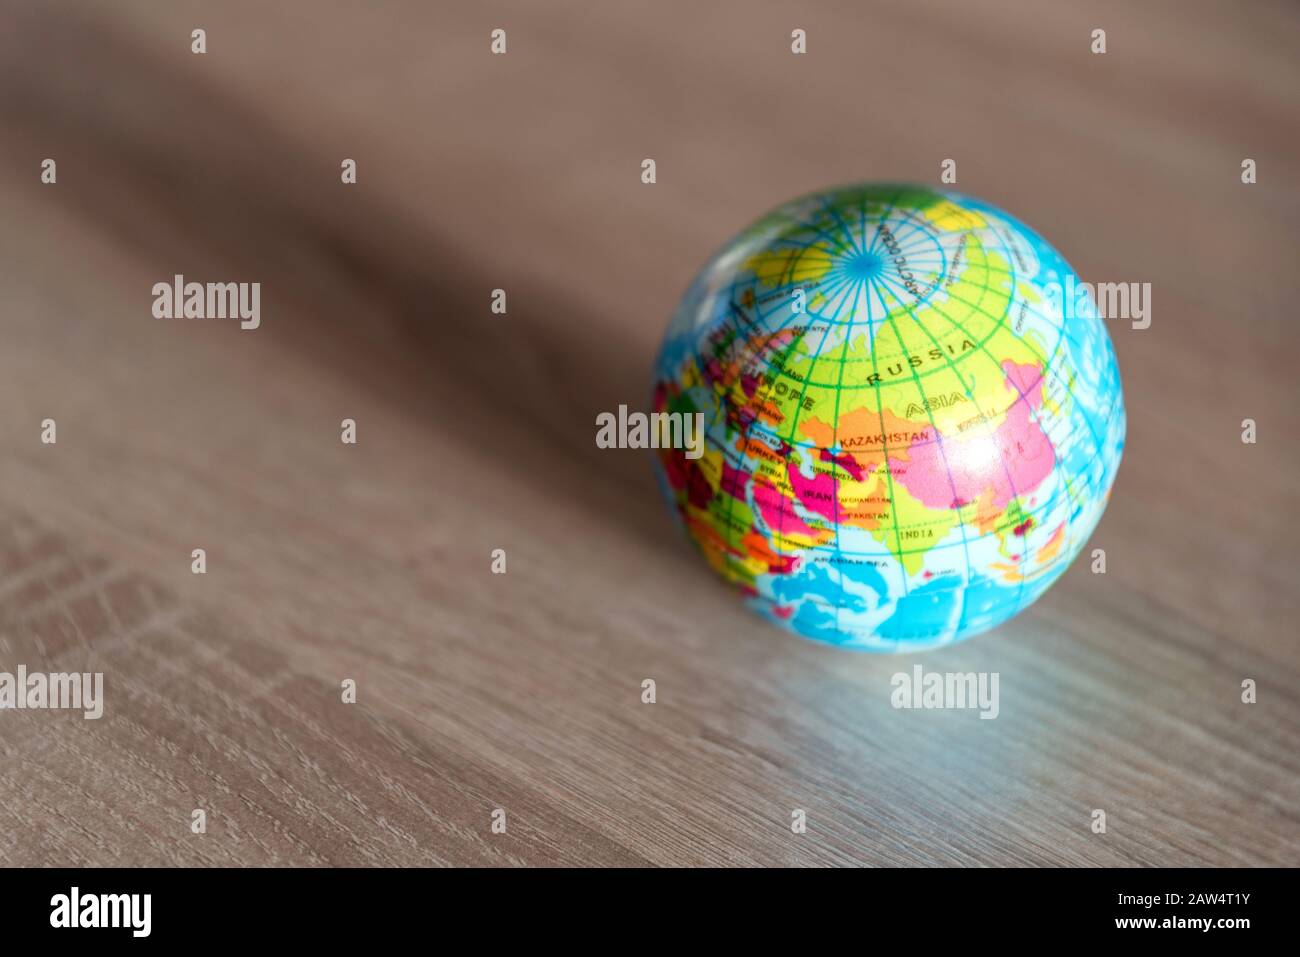 Asia continent on a small globe on a wooden surface Stock Photo